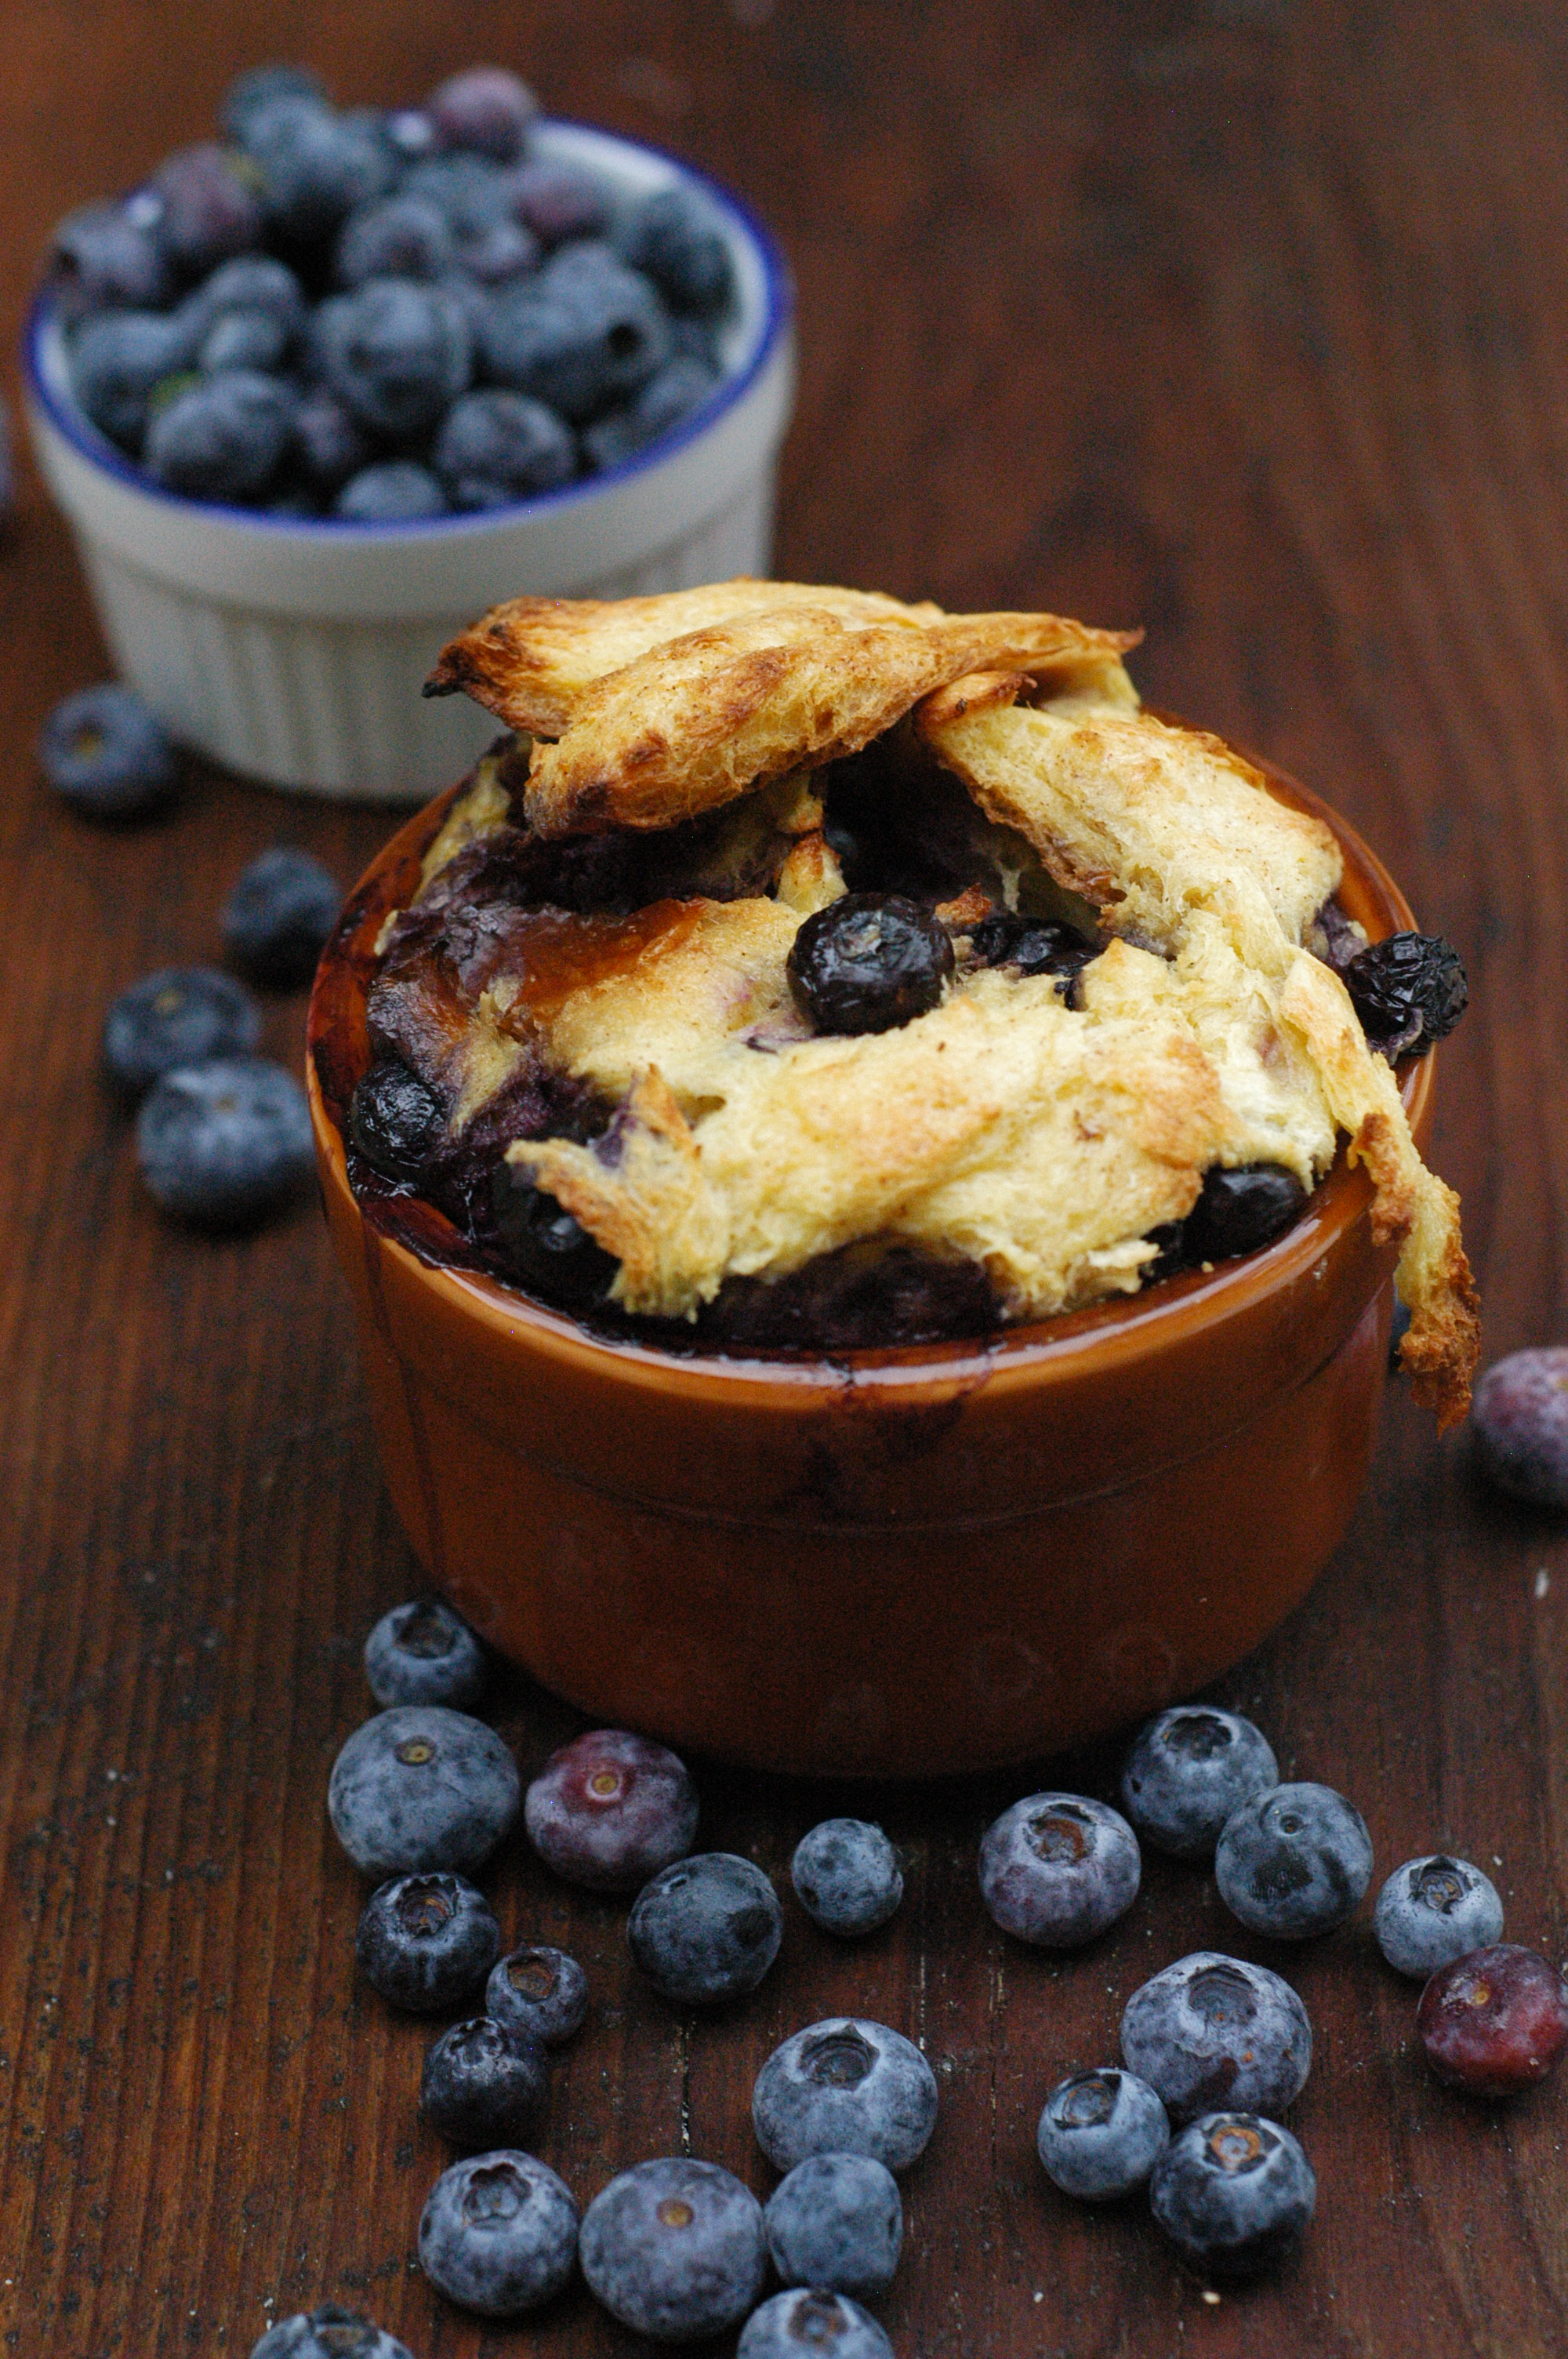 A Trip Down Blueberry Lane – Blueberry & Challah Breakfast Bread Pudding